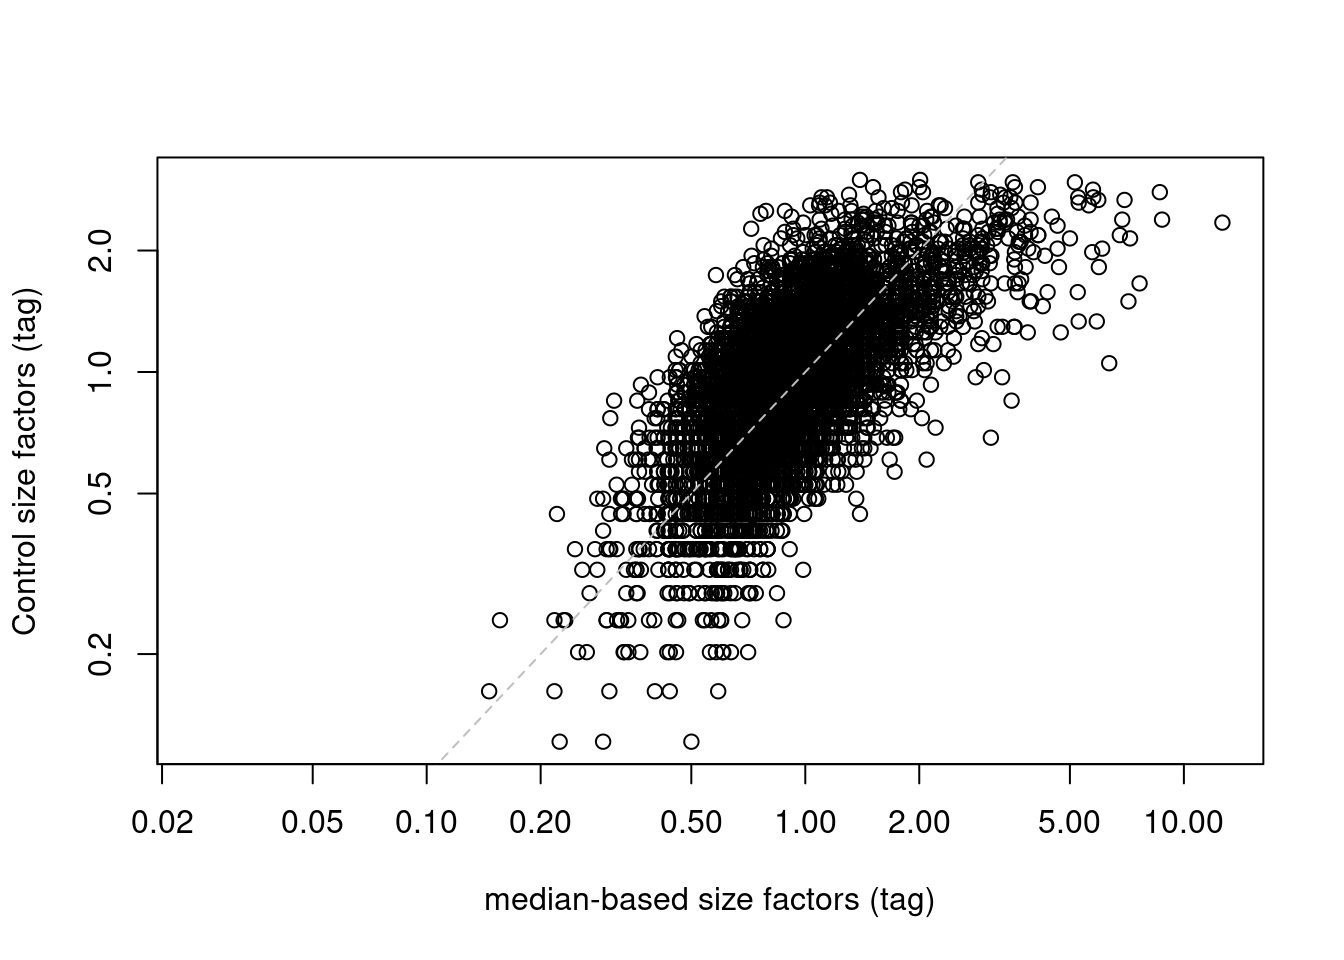 IgG control-derived size factors for each cell in the PBMC dataset, compared to the median-based size factors. The dashed line represents equality.